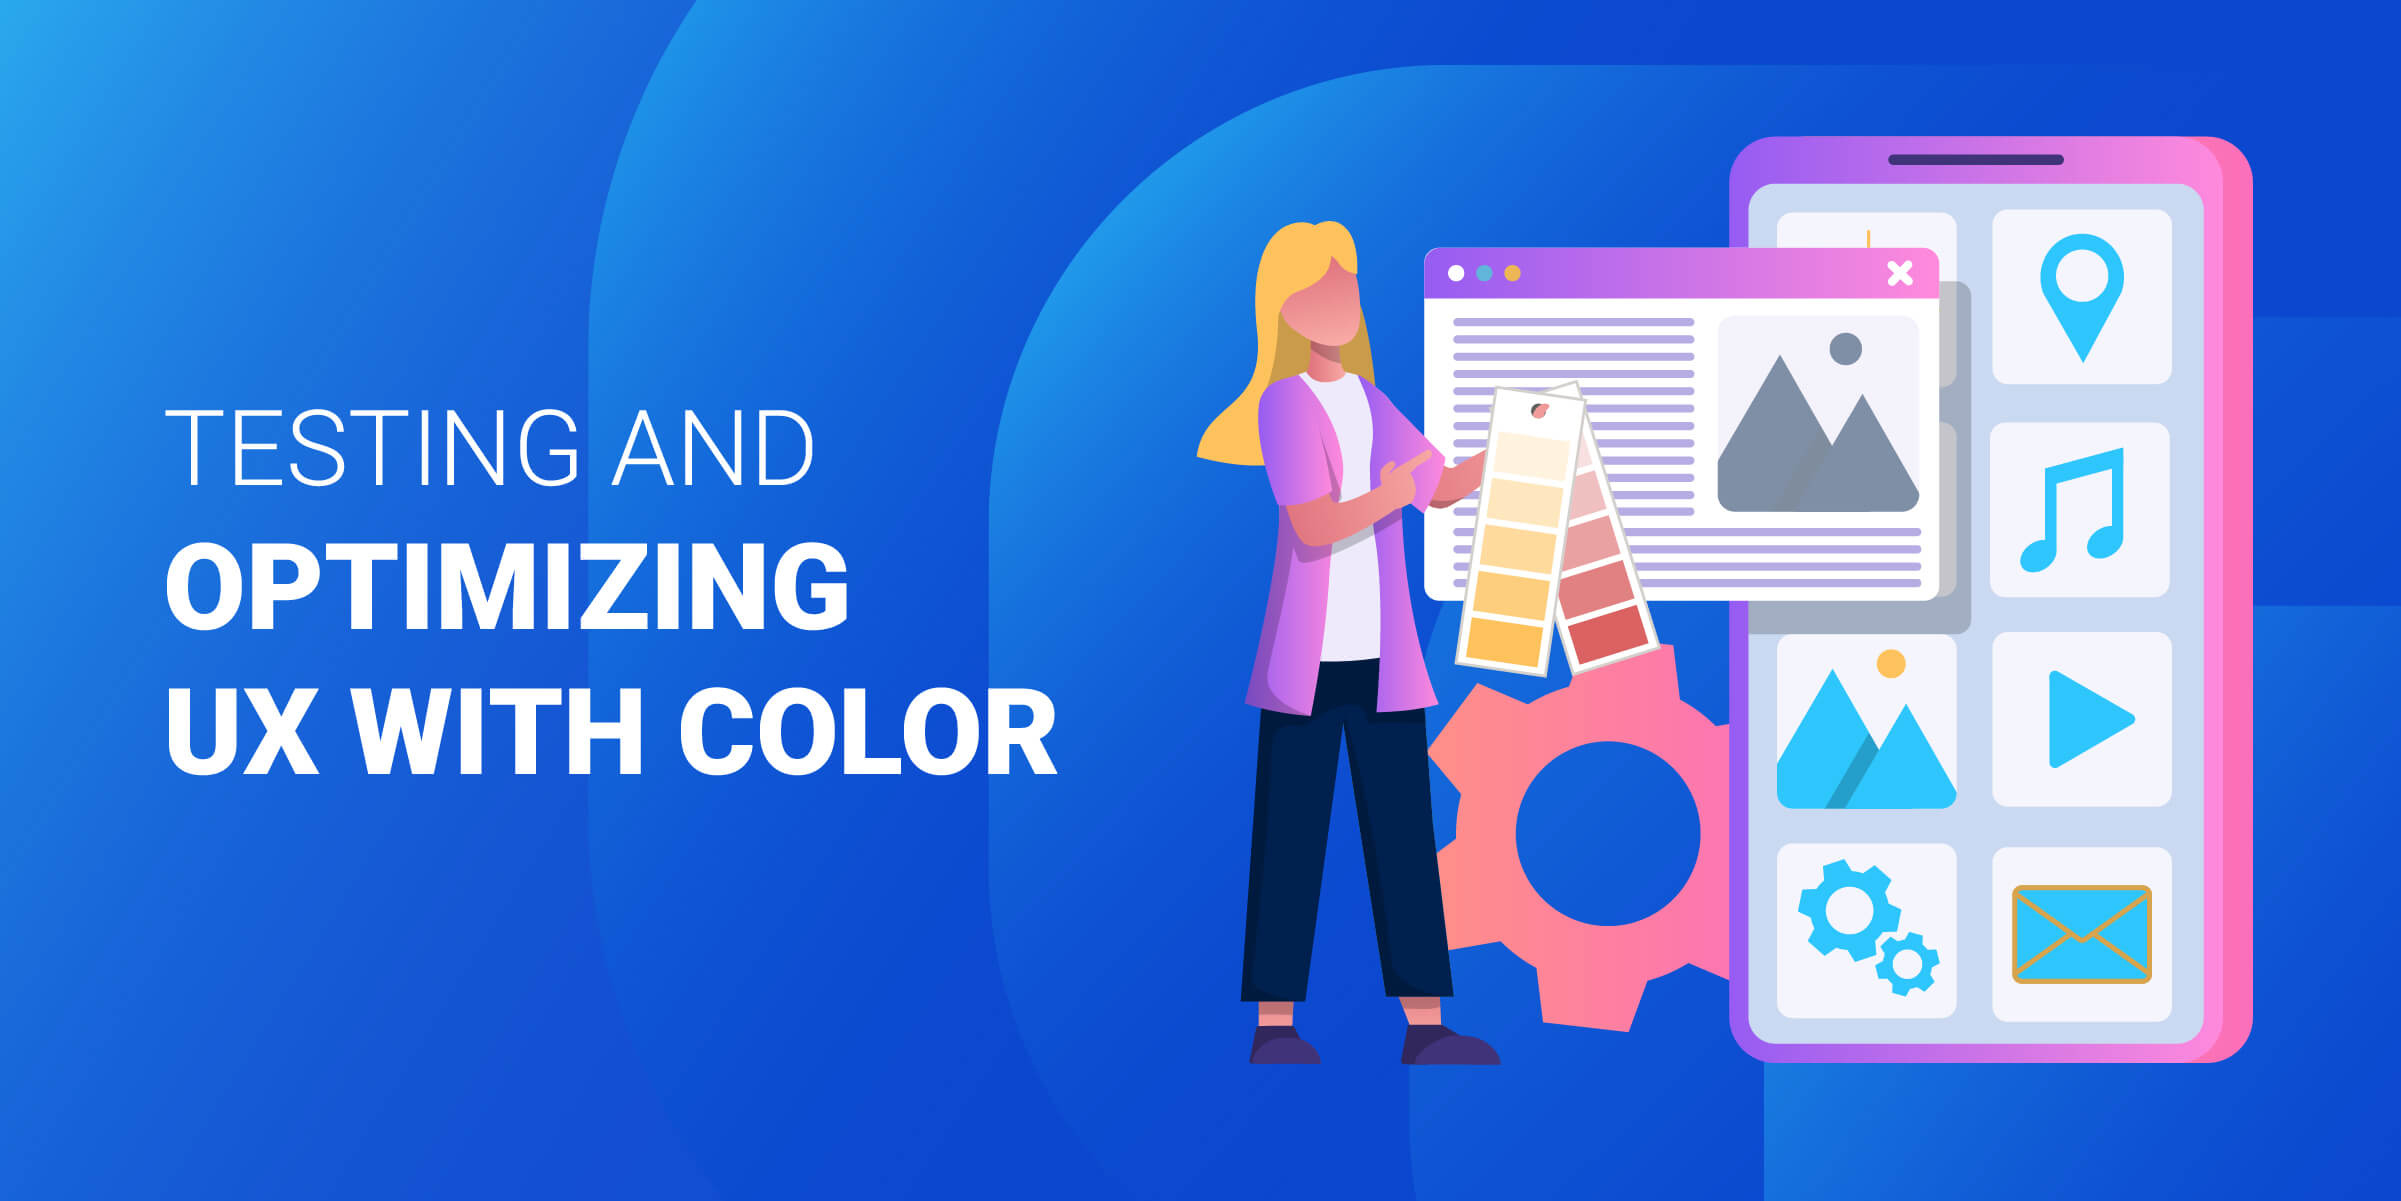 Optimizing UX with Color